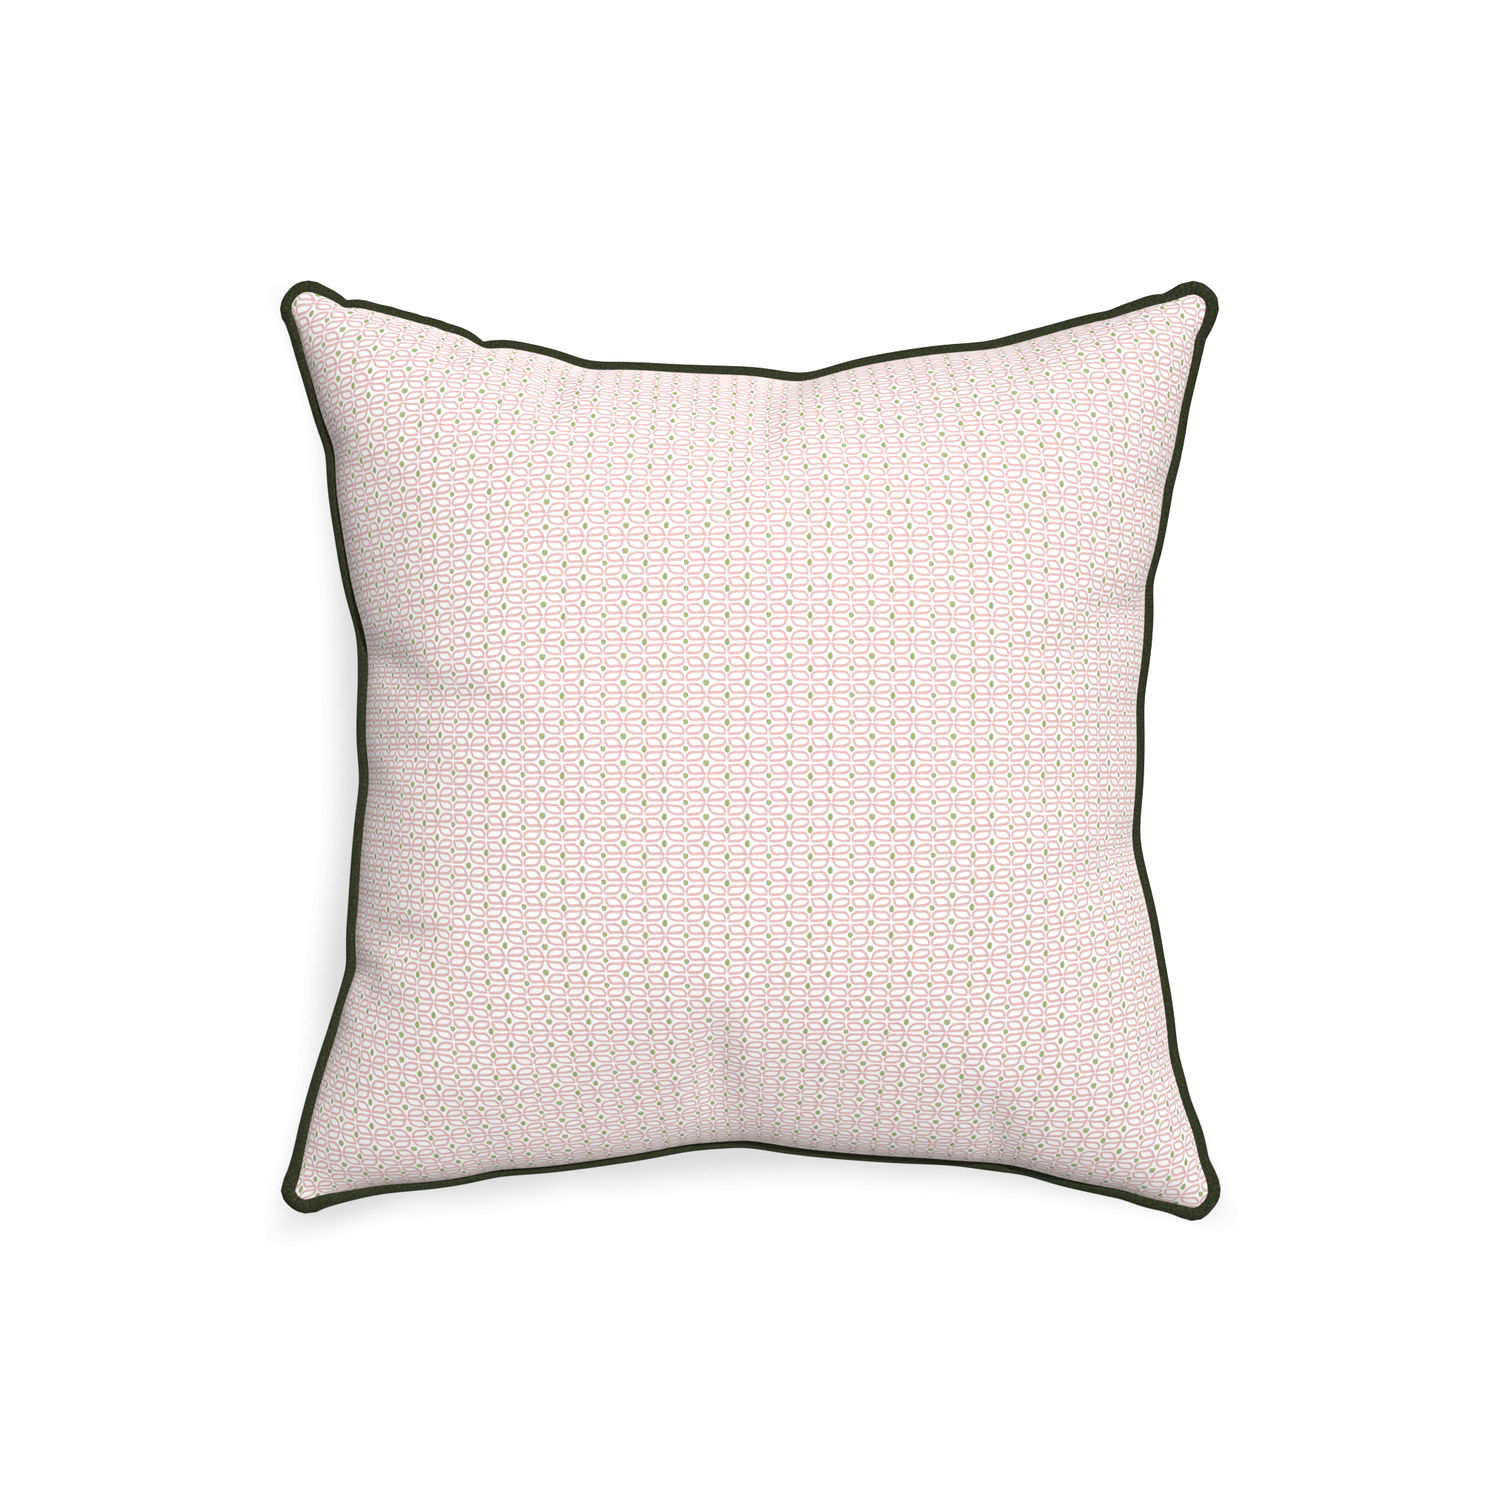 20-square loomi pink custom pink geometricpillow with f piping on white background